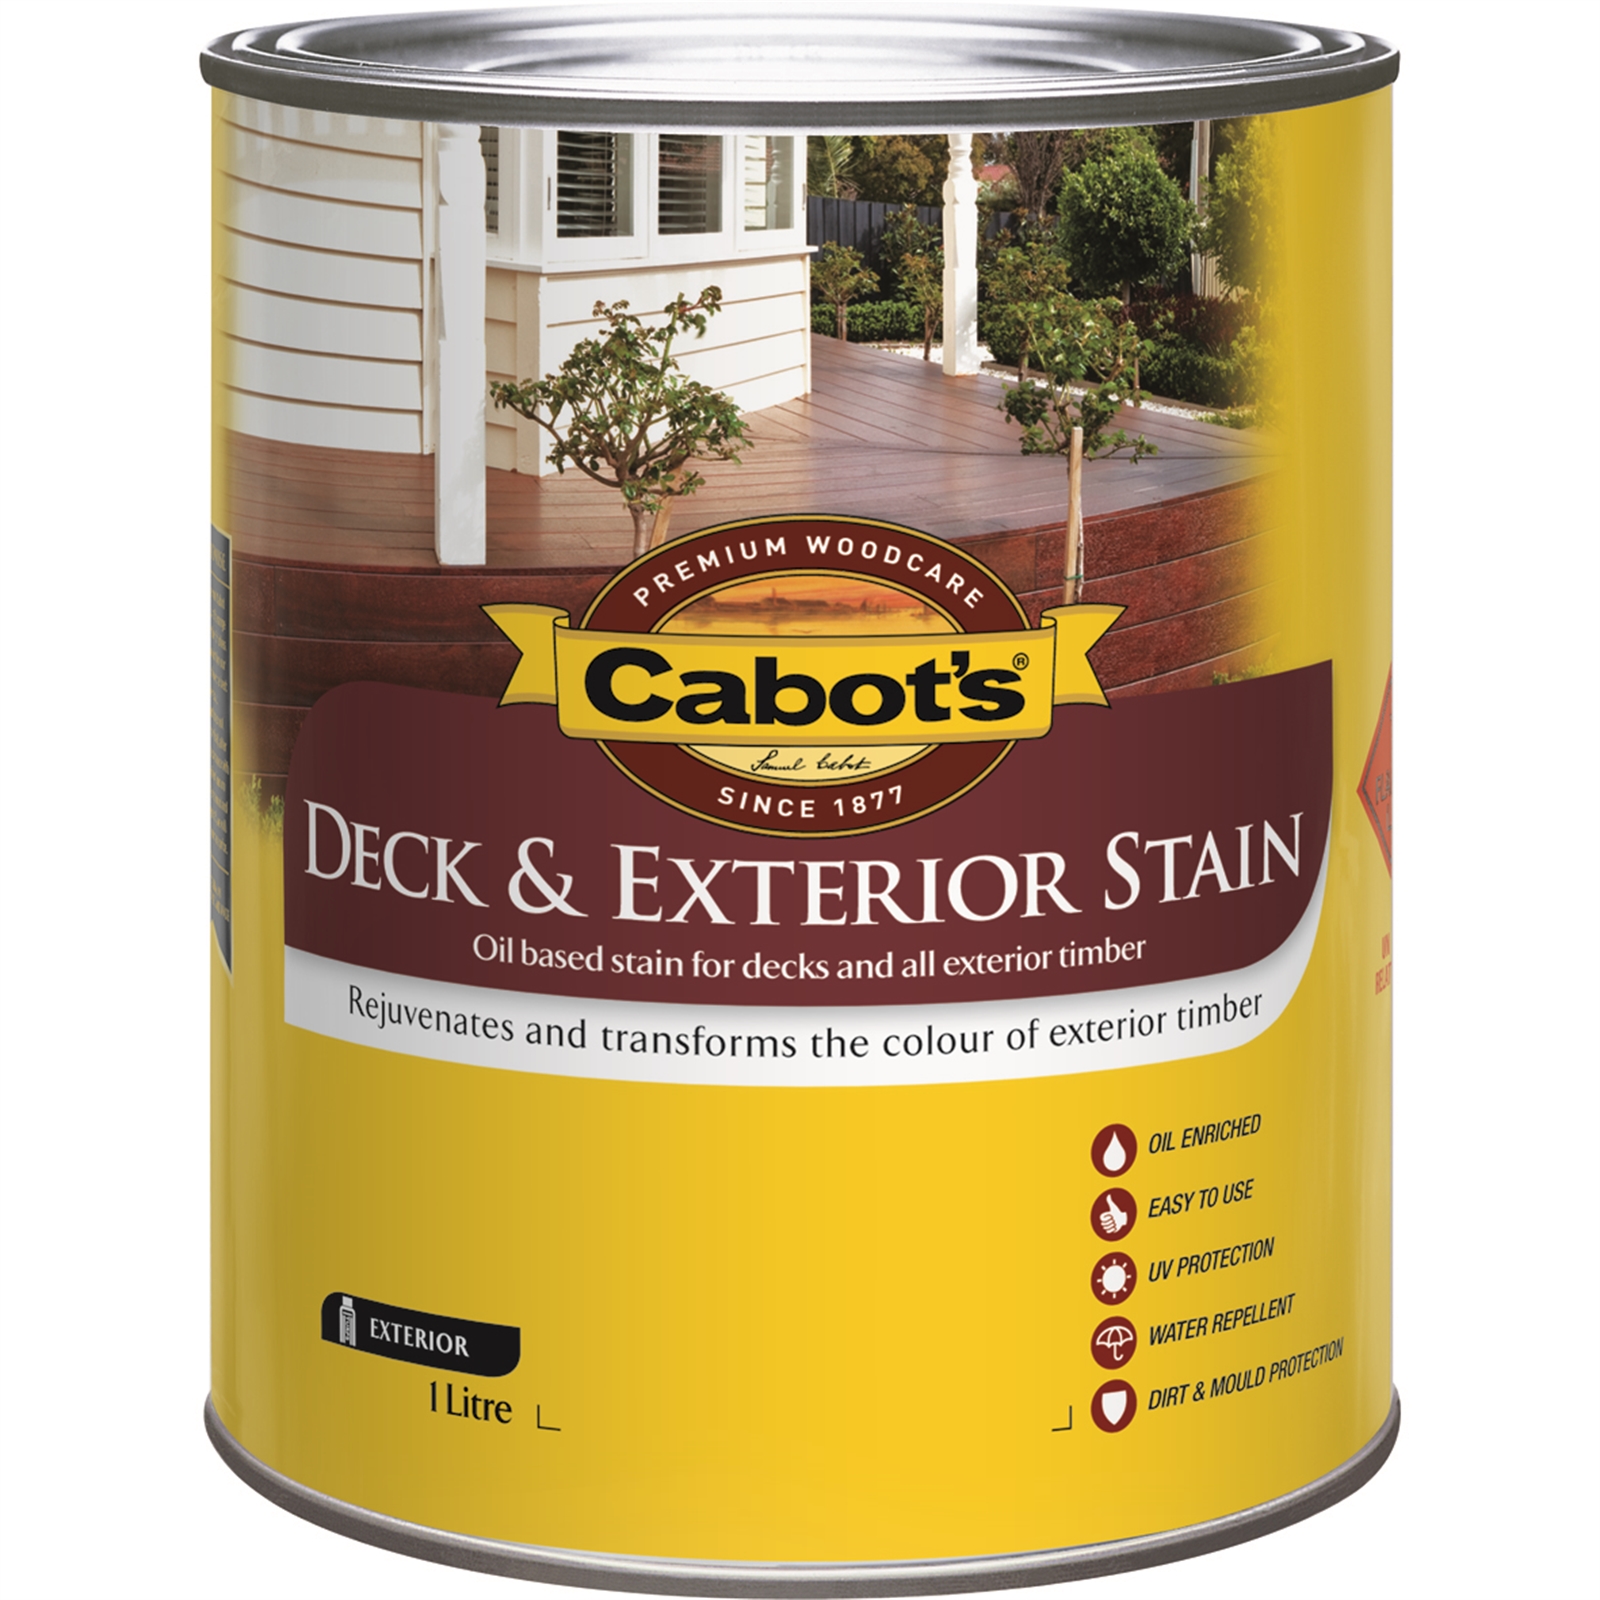 Cabot's 1L Deck & Exterior Stain Merbau Oil Based Timber Stain